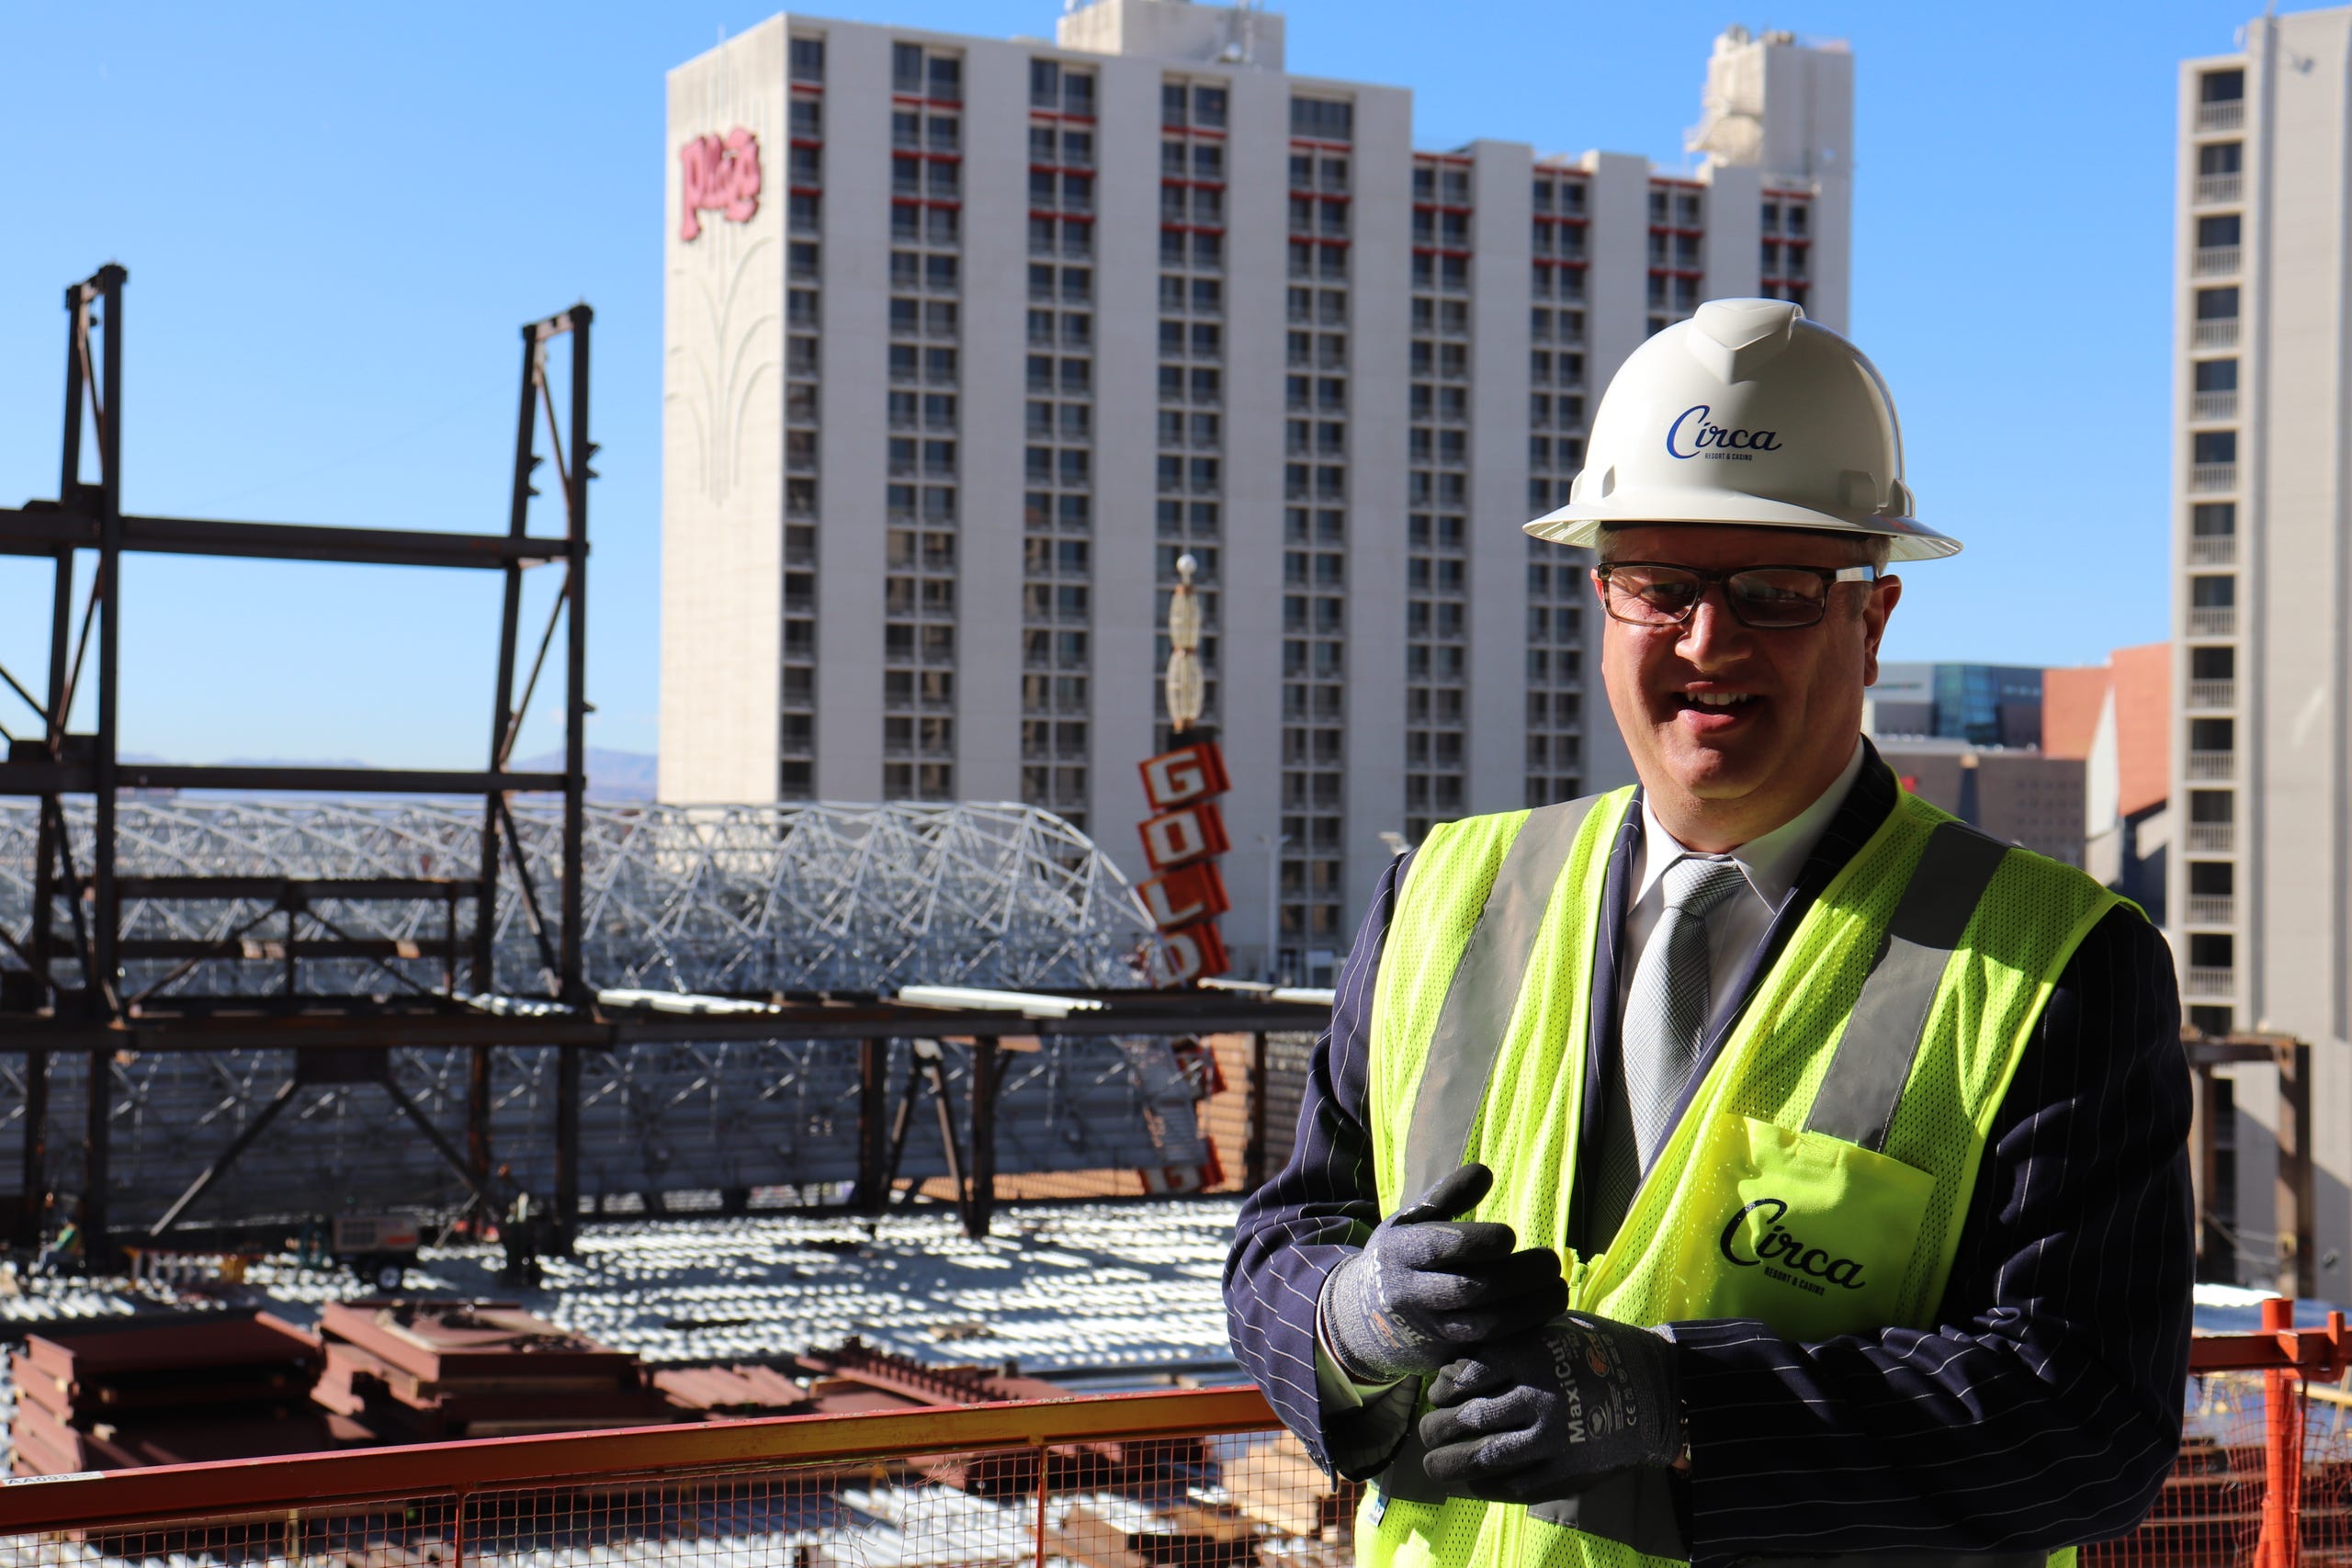 Derek Stevens is Detroit native who first tossed the dice as a Las Vegas investor in 2006, when he bought a stake with his brother in the Golden Gate on Fremont Street. Today, Stevens owns the D Las Vegas, the Downtown Las Vegas Events Center and the Circa Sportsbook. He's now building the Circa Resort & Casino.